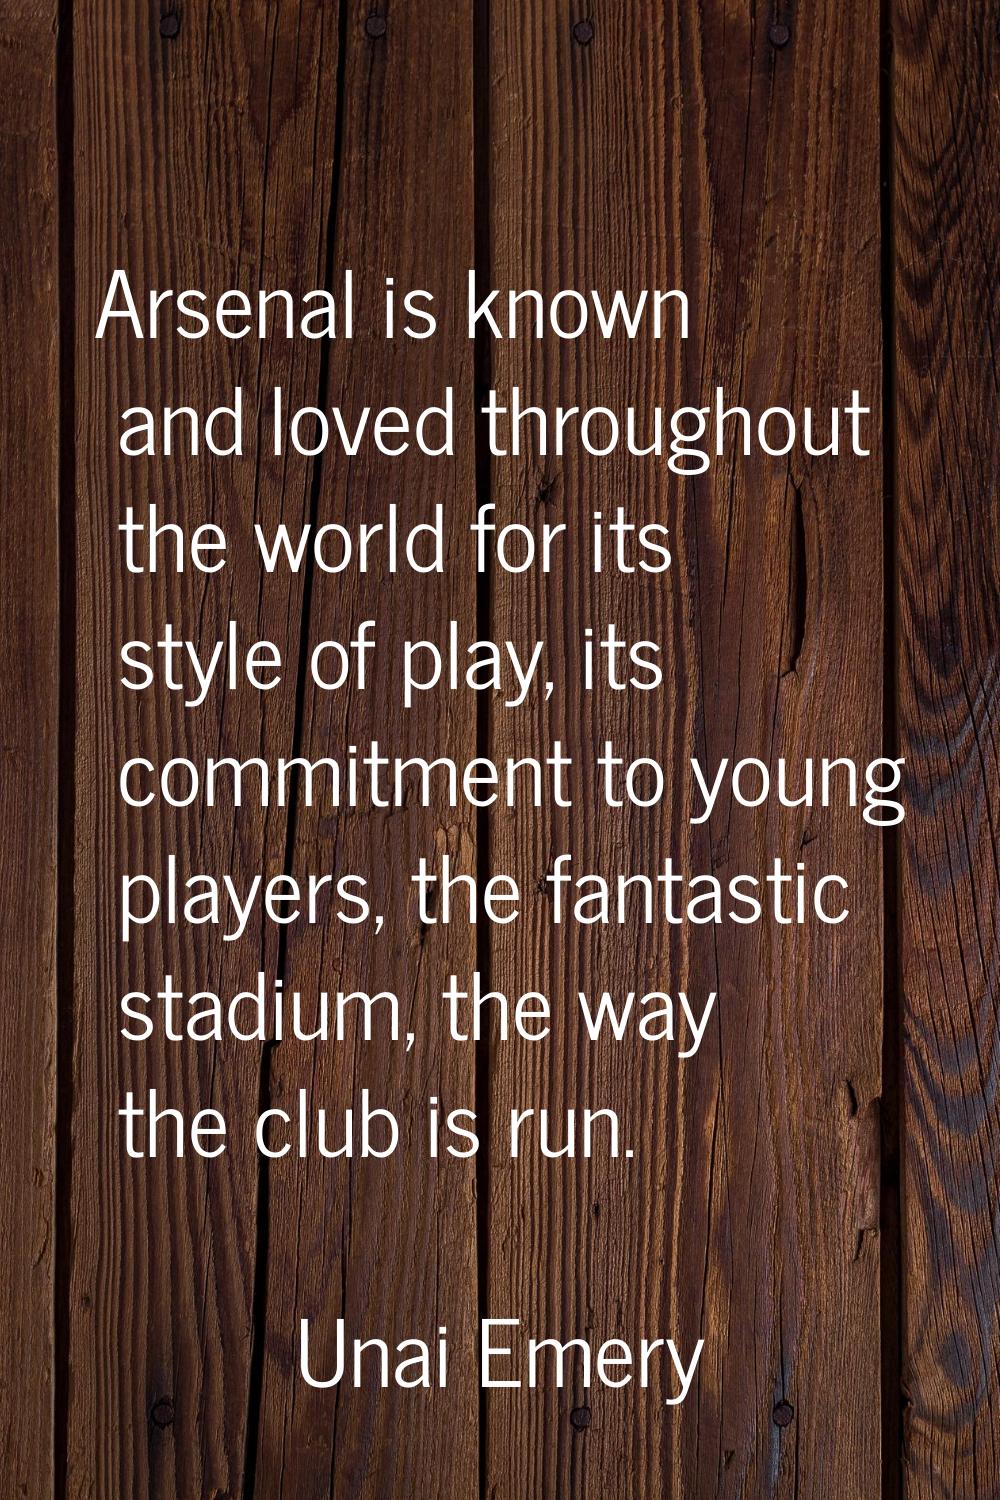 Arsenal is known and loved throughout the world for its style of play, its commitment to young play